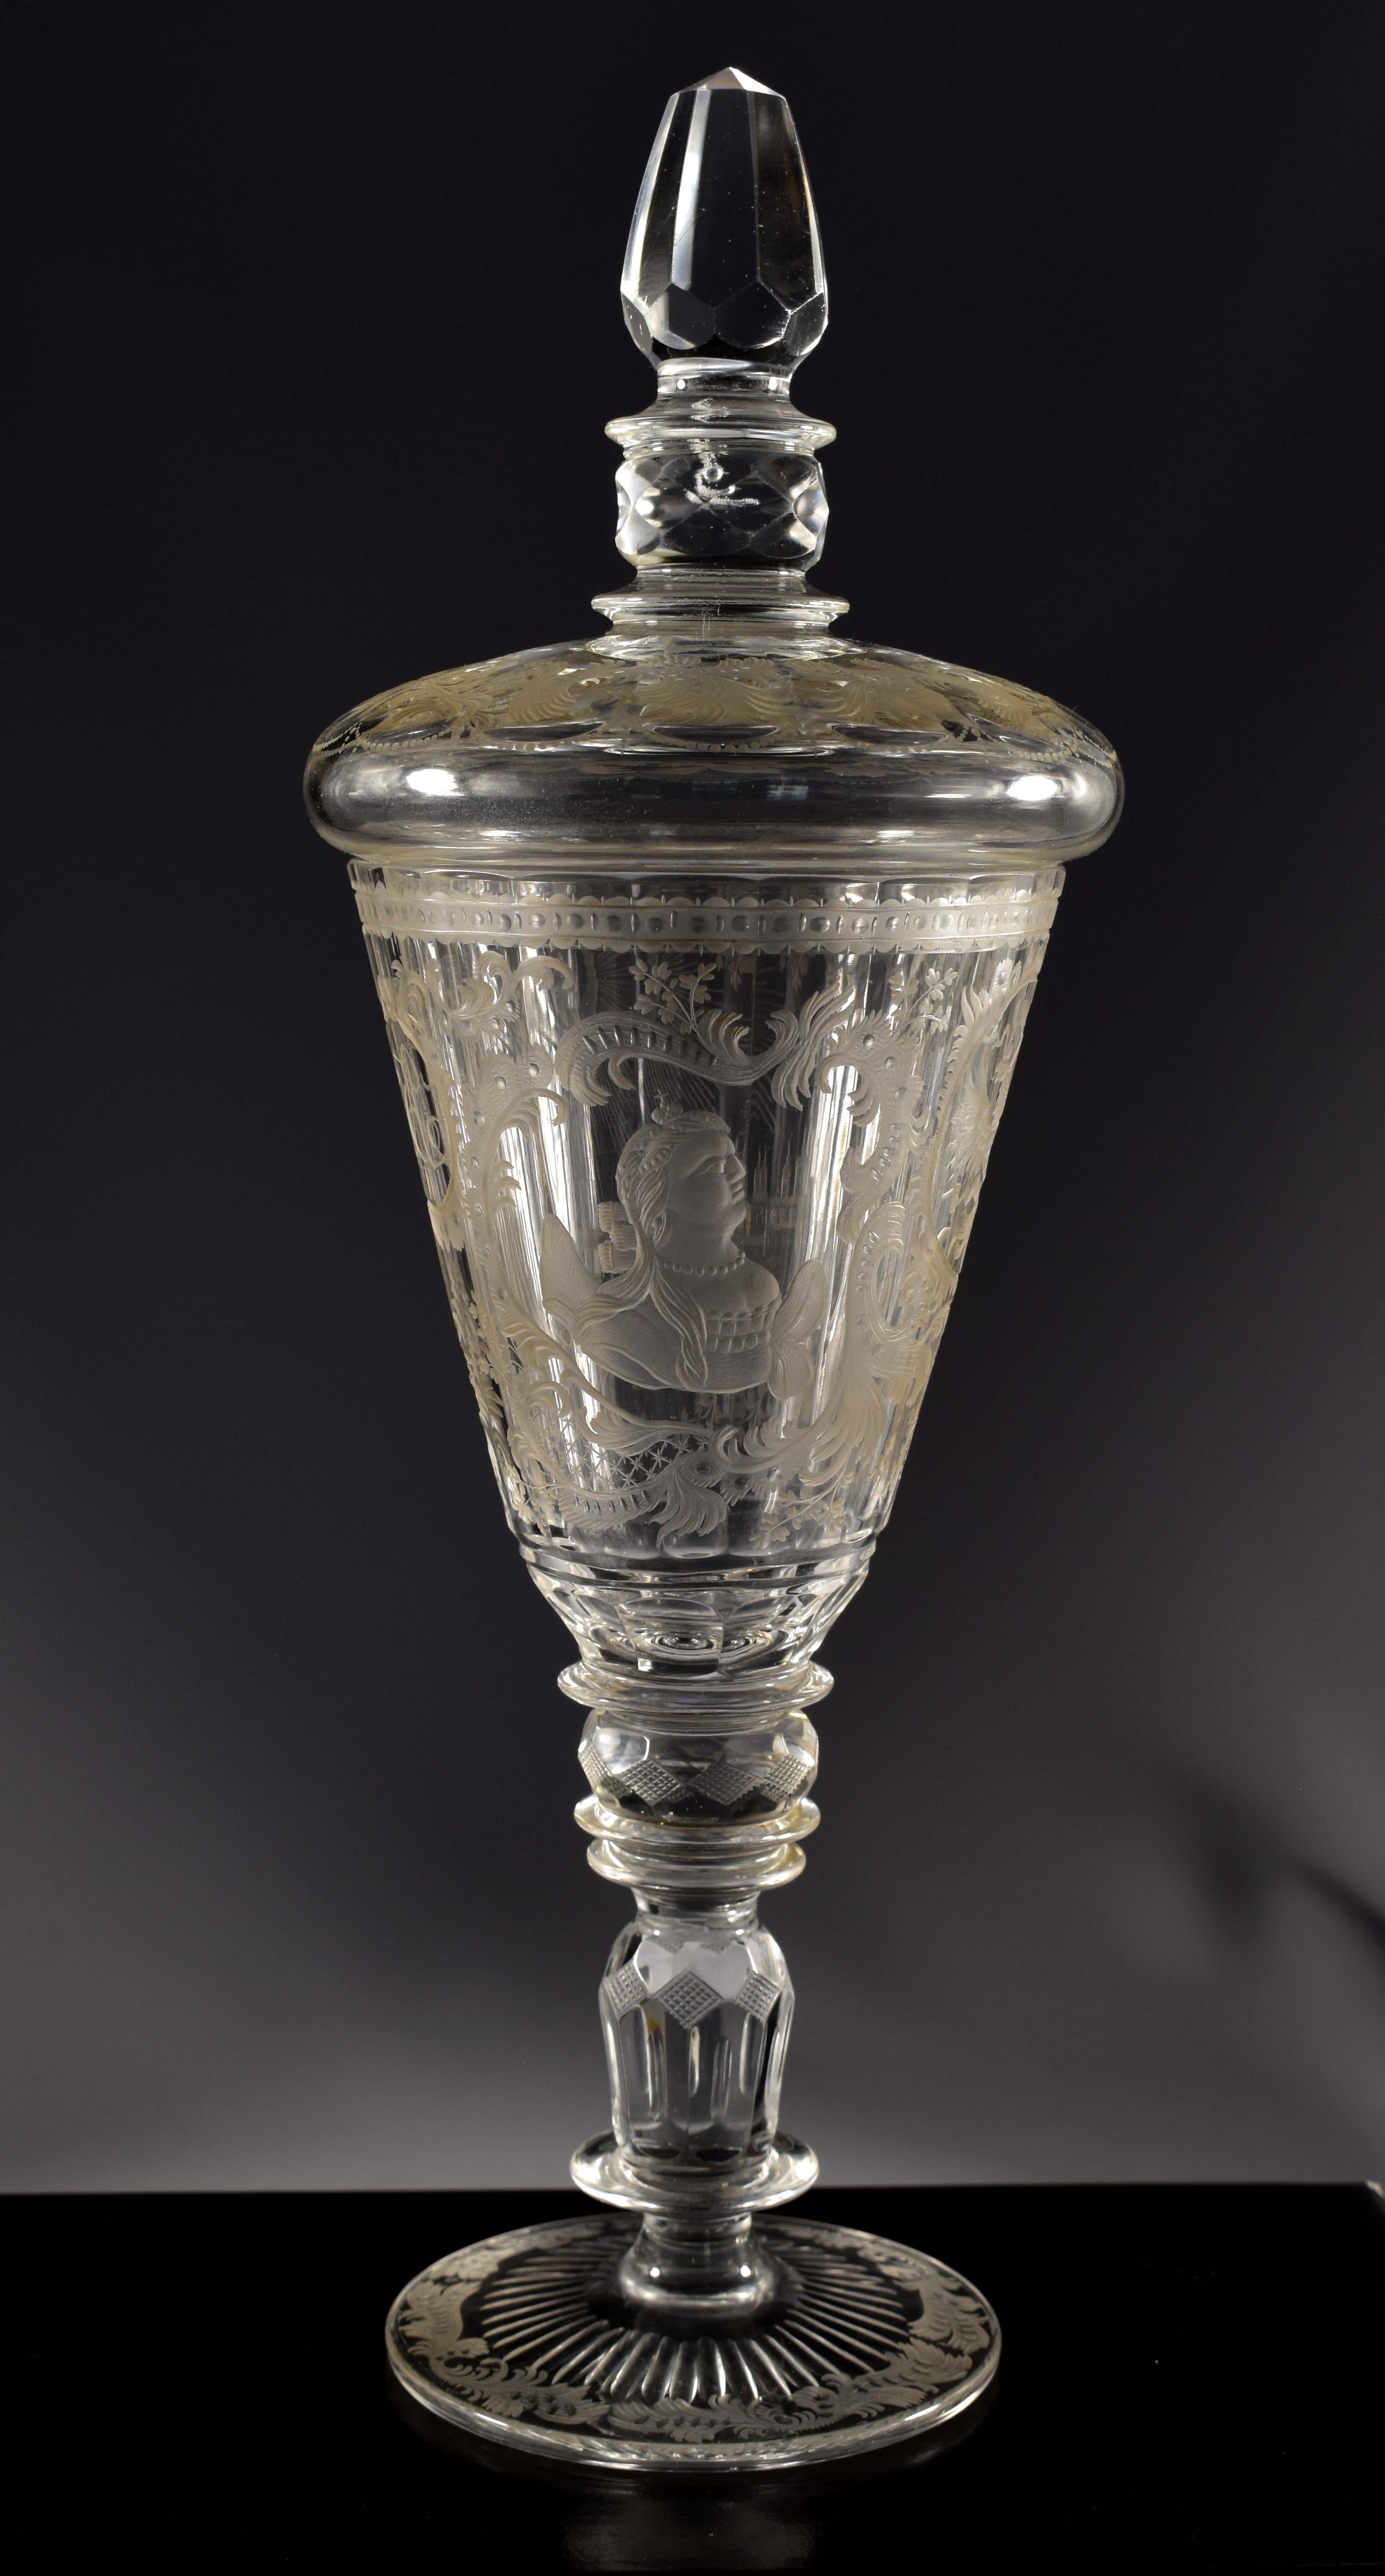 Beautiful cut goblet with engraving portrait of Catherine II the Great. There is also an engraved eagle, the city and the initials of the Russian Empress. Everything is complemented by beautiful engraved ornaments. We must not forget the amazing